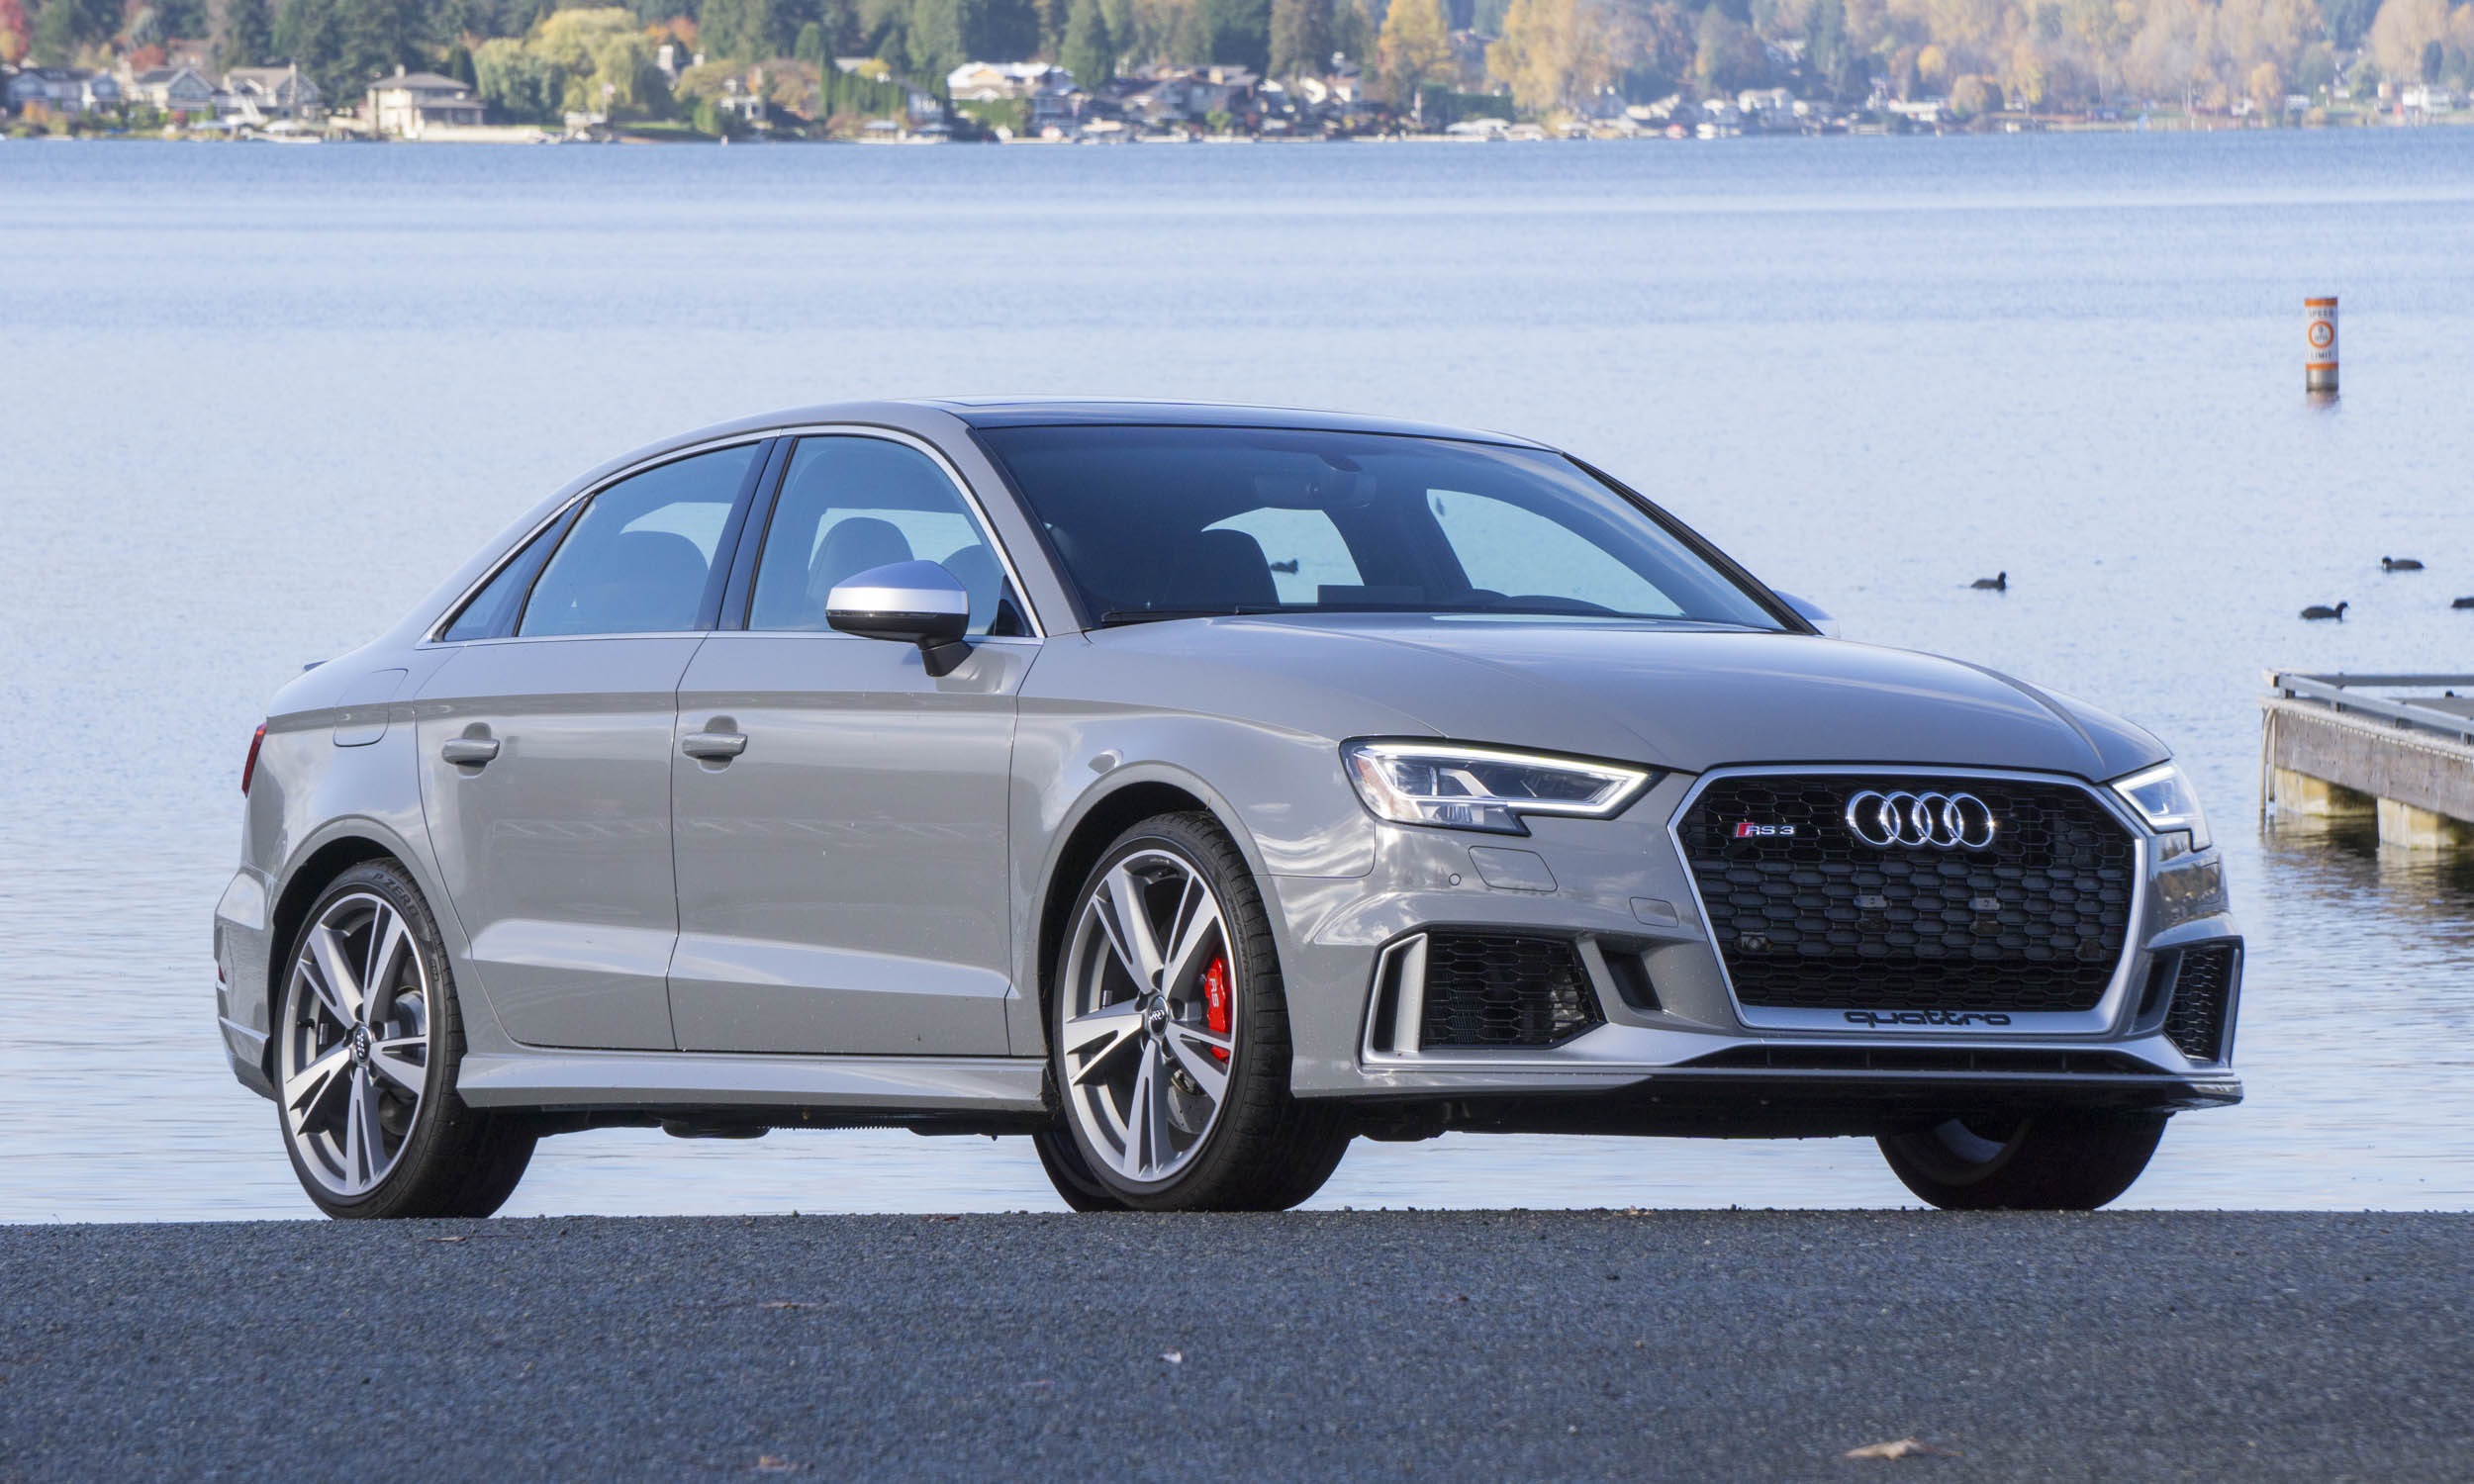 2018 Audi RS 3: Review | Our Auto Expert